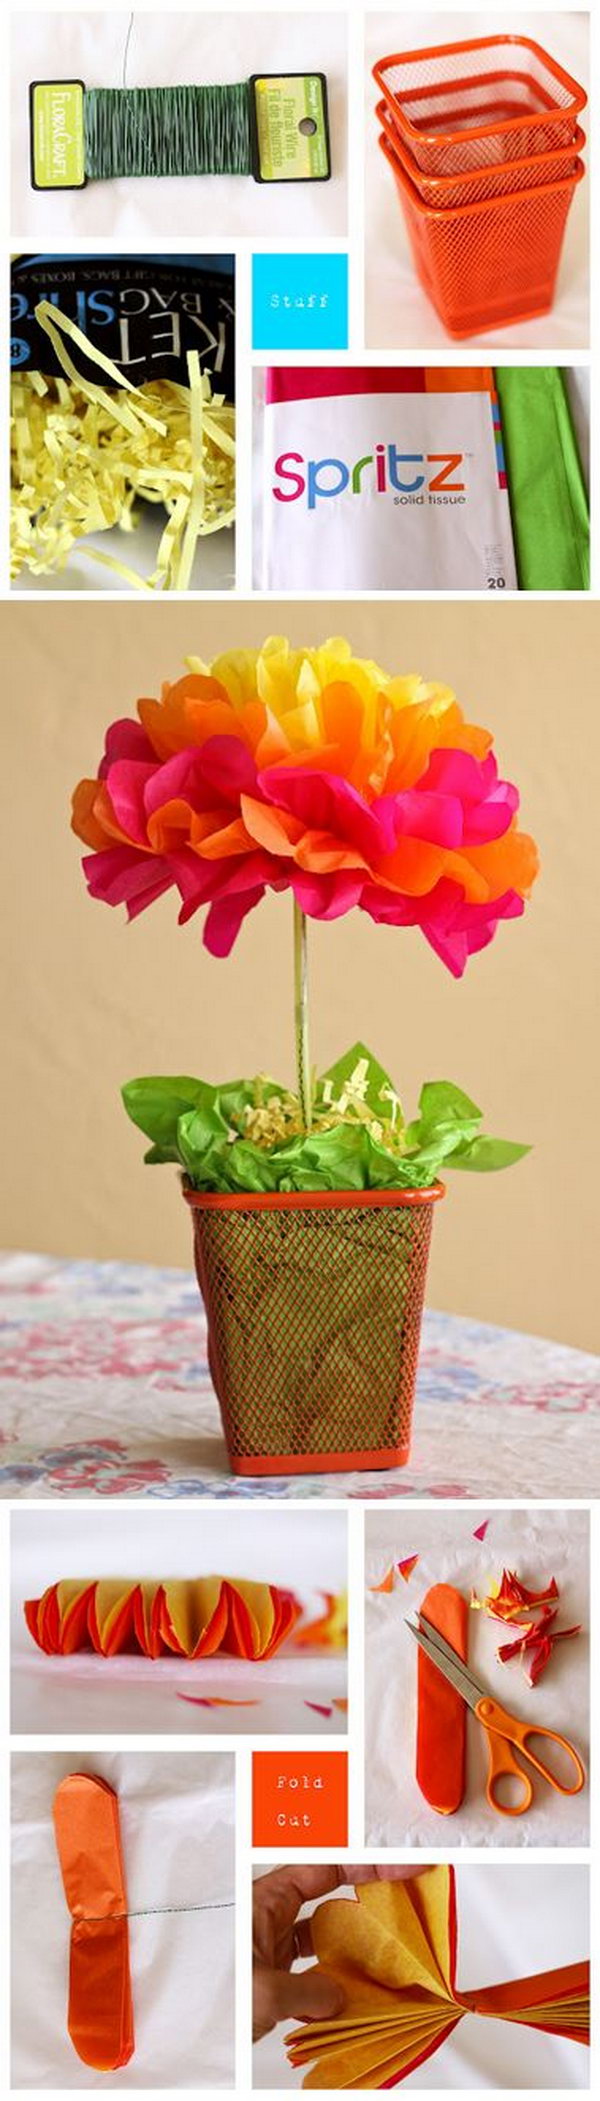 Tissue Paper Flower Centerpieces. Super easy, super inexpensive festive table centerpieces. Get started to make some for your next party with the tutorial 